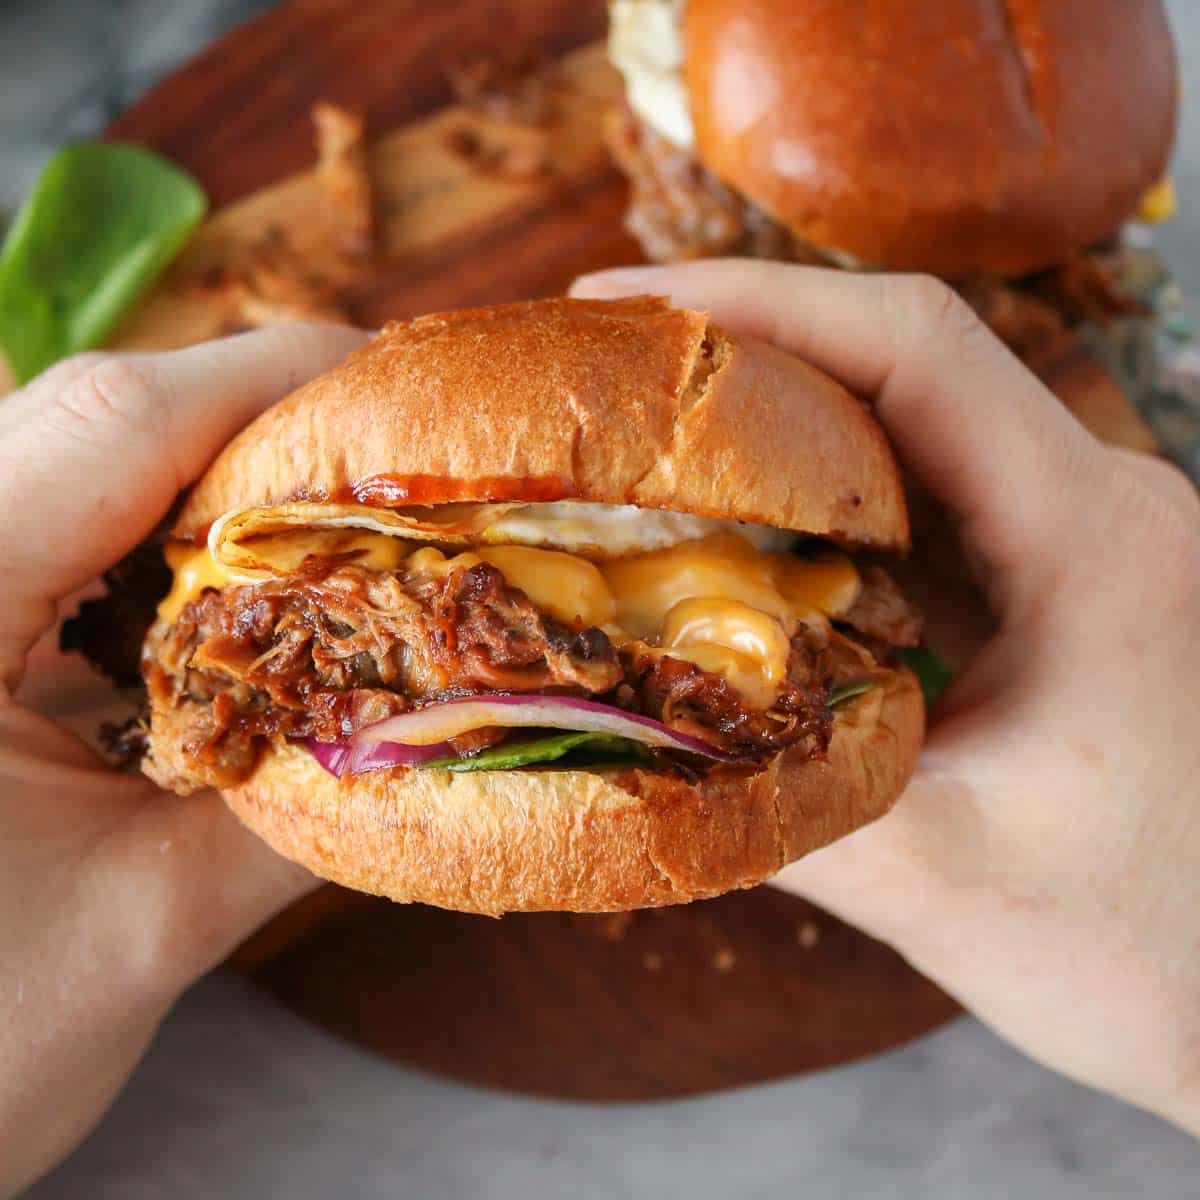 Two hands holding a pulled pork breakfast sandwich.